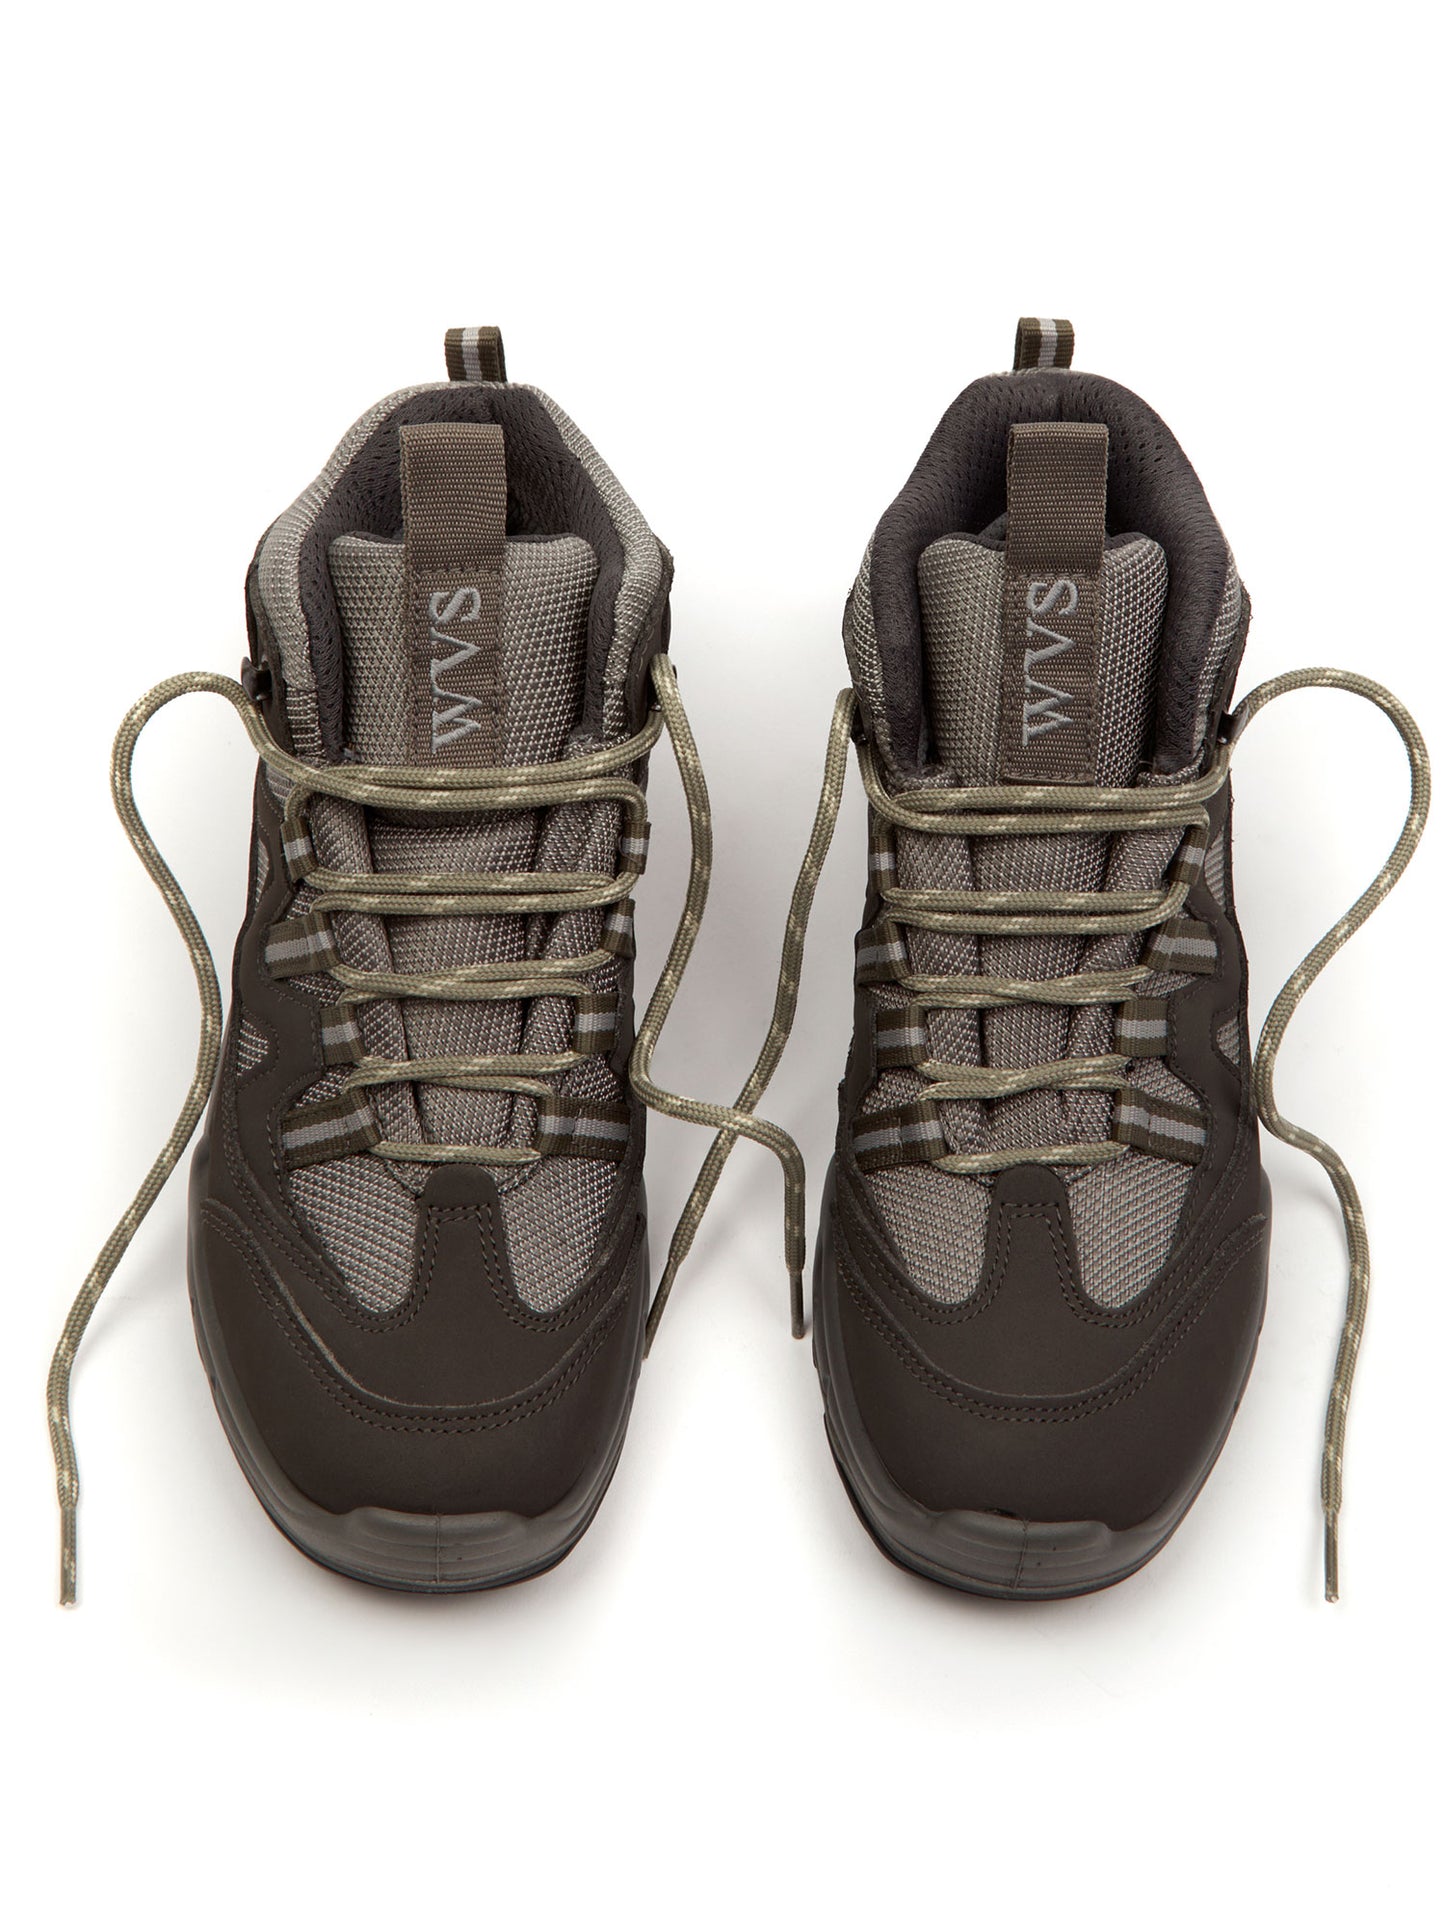 WVSport Sequoia Edition Waterproof Hiking Boots